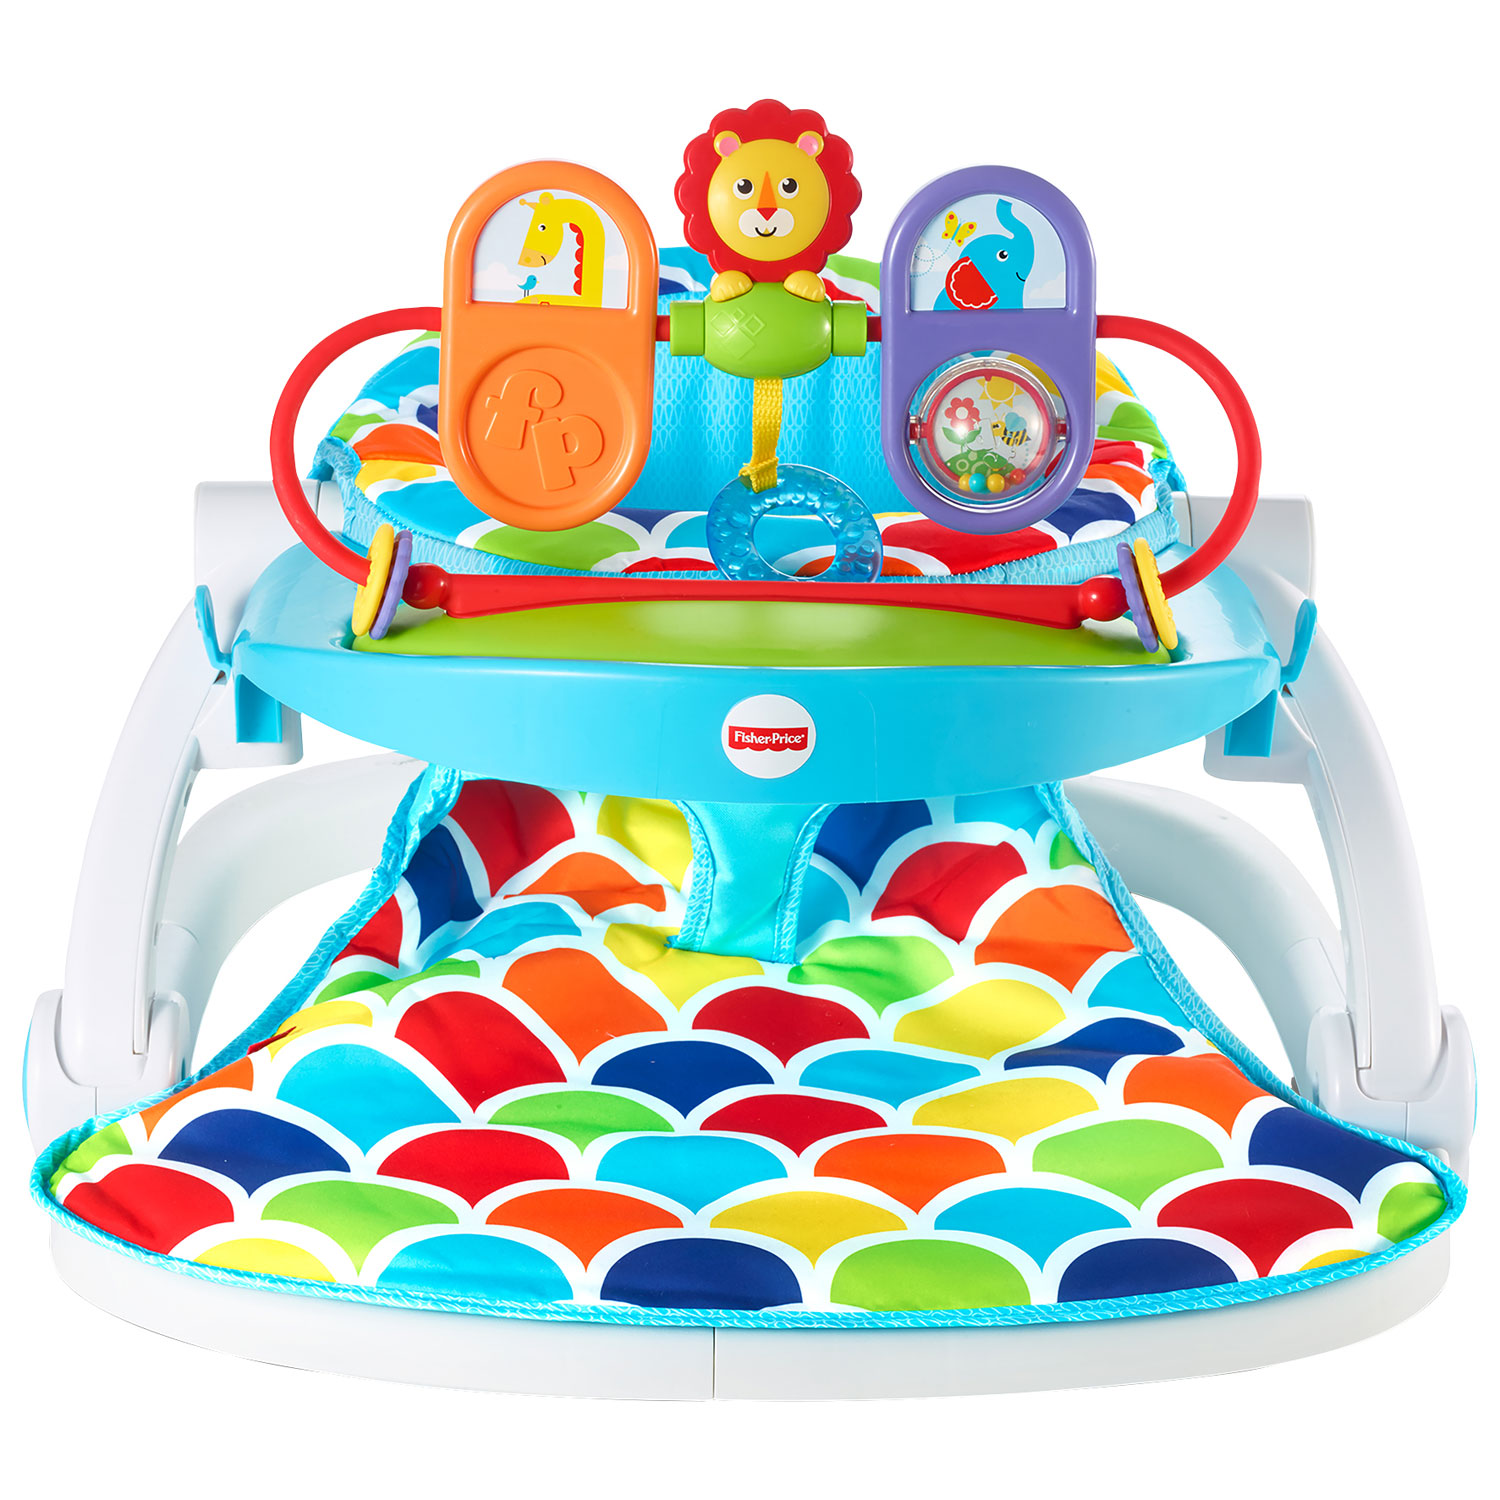 Fisher-Price Happy Hills Sit-Me-Up Floor Seat with Tray - Blue